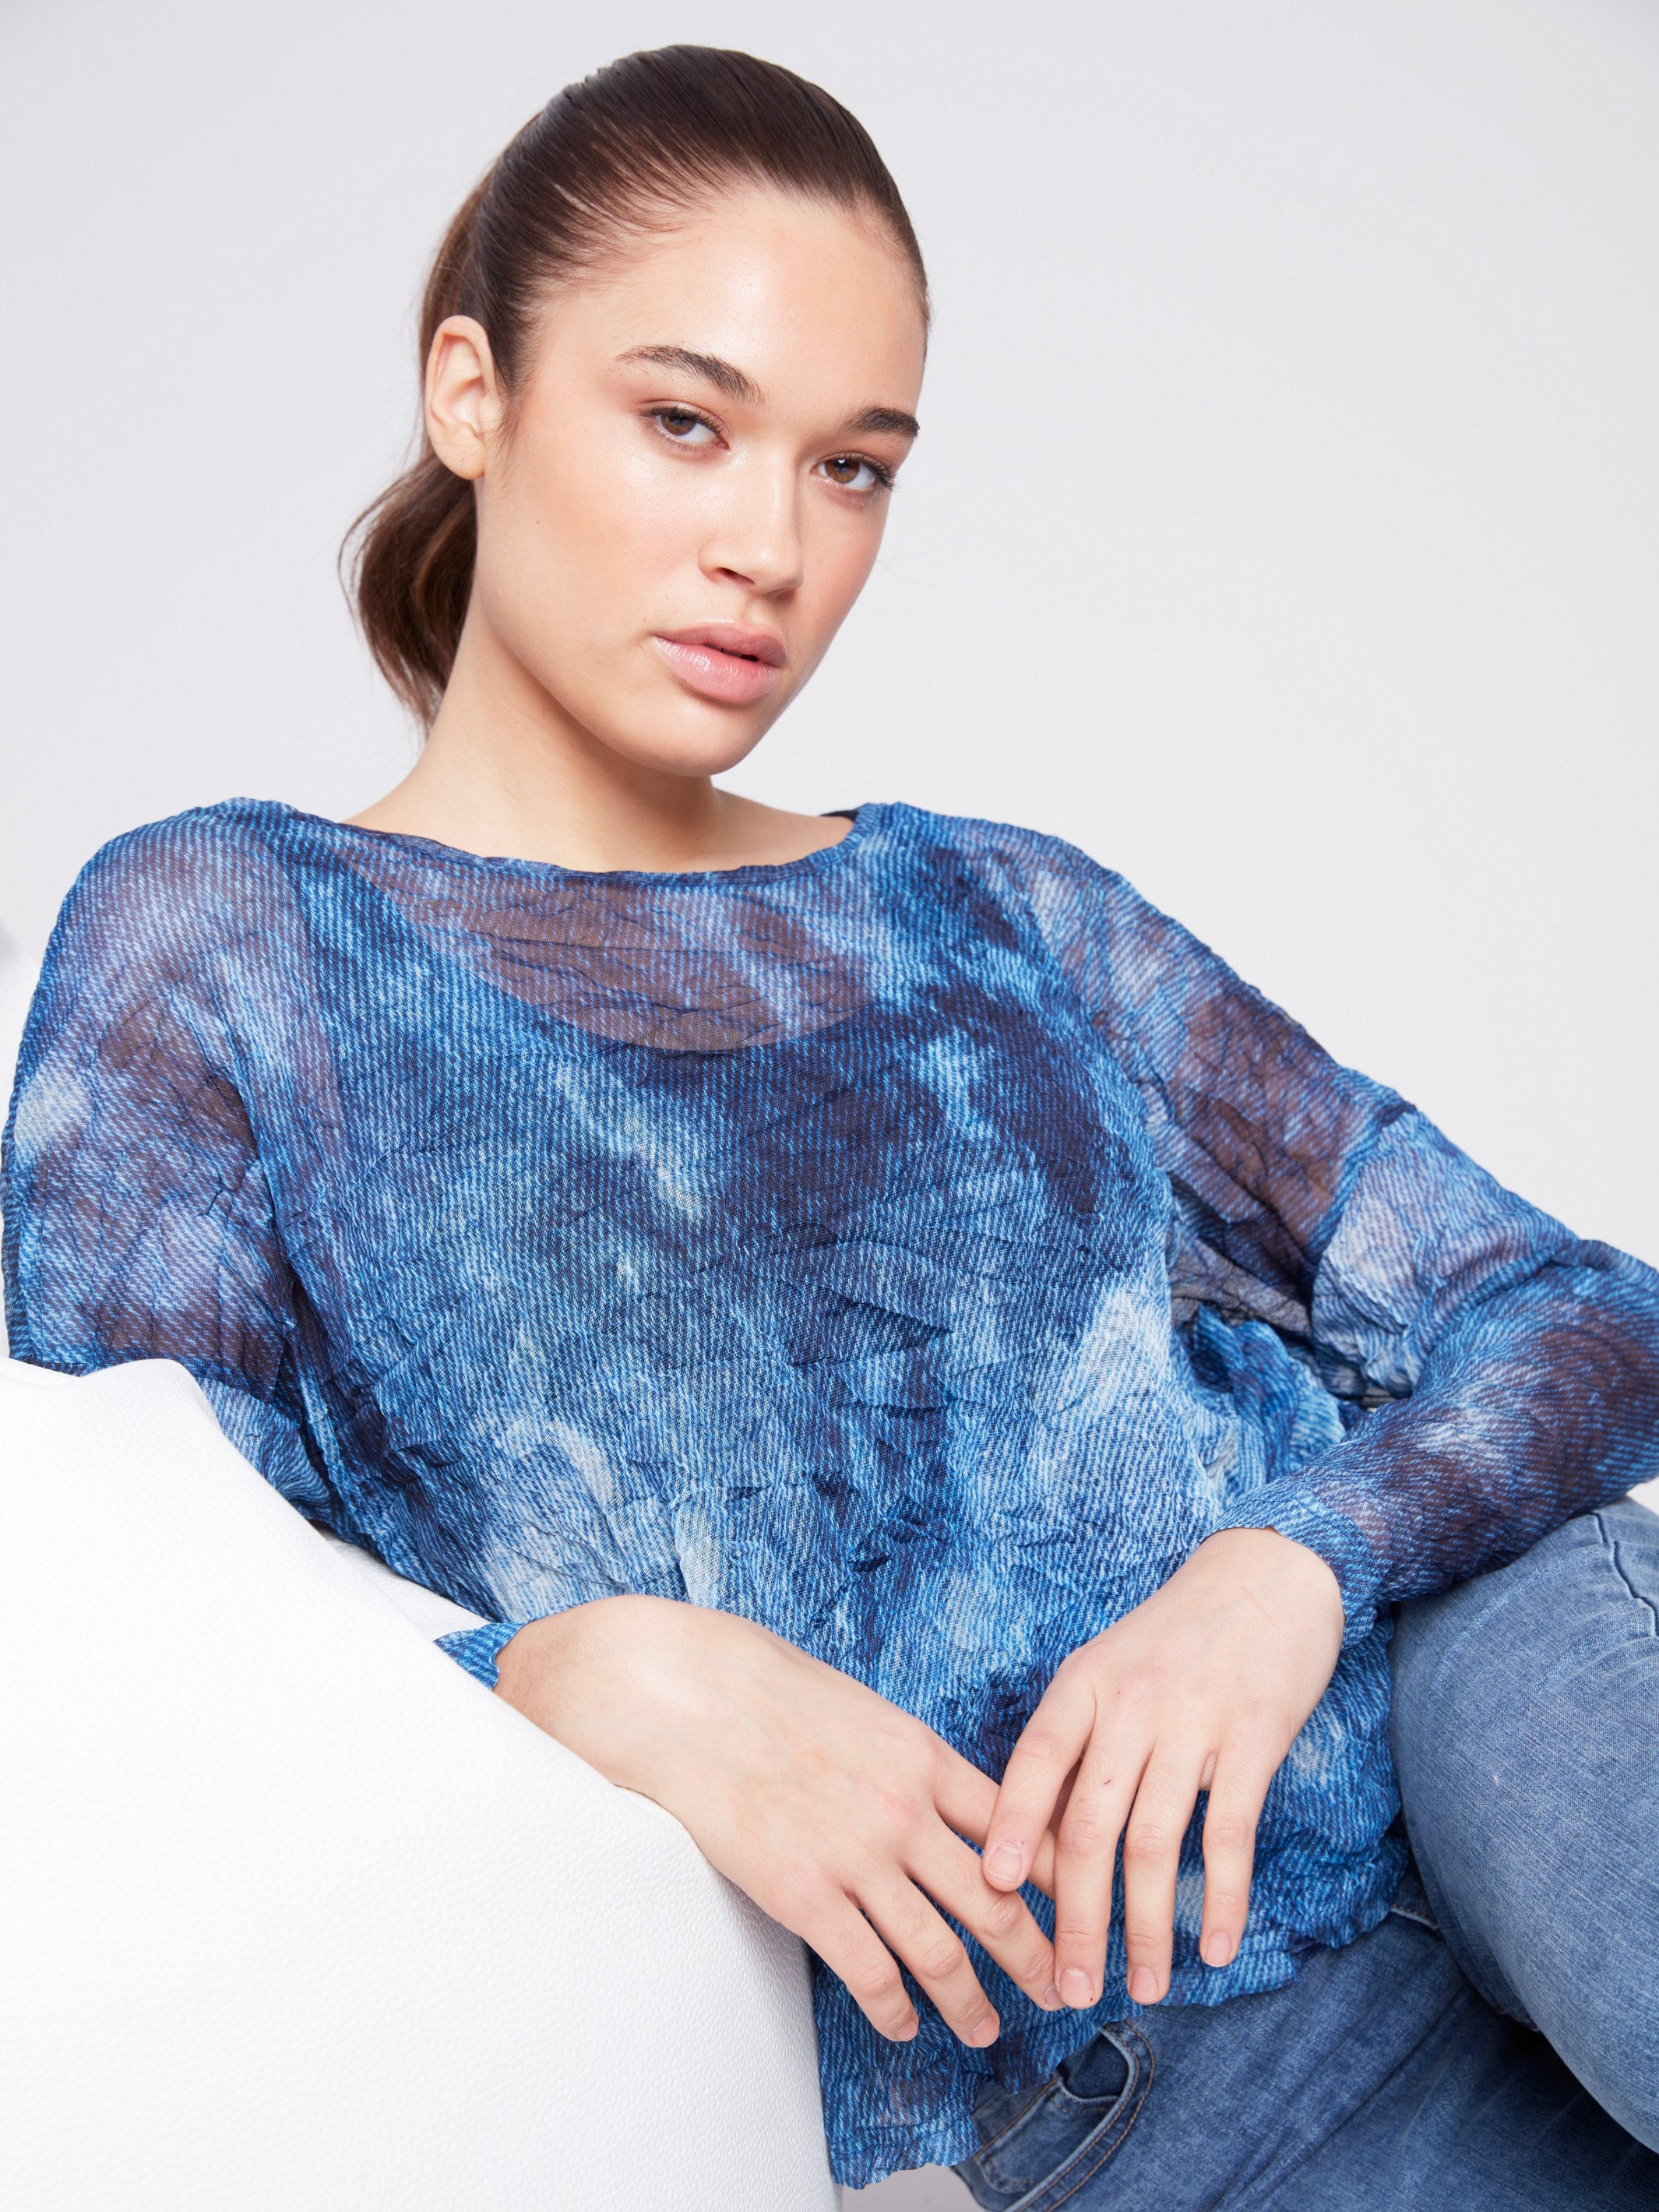 Printed Crinkle Mesh Top - Denim - Charlie B Collection Canada - Image 4